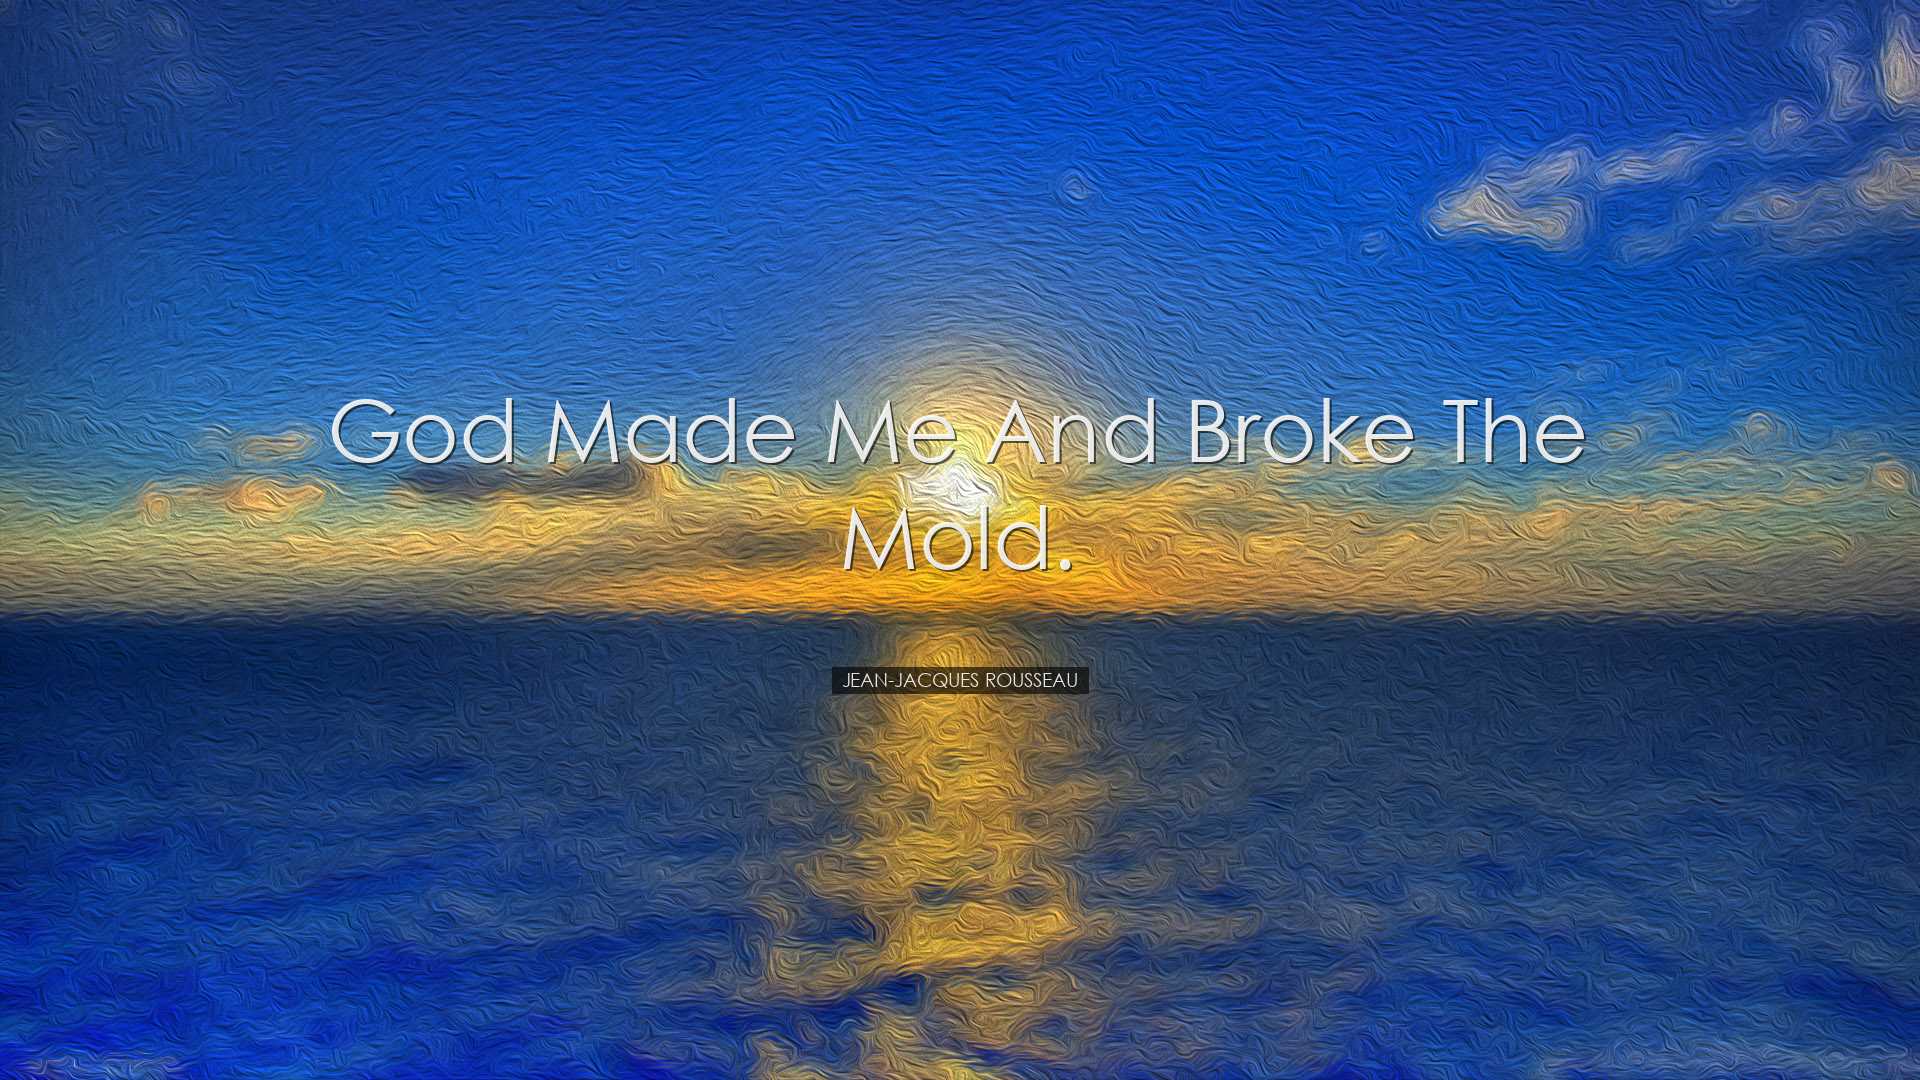 God made me and broke the mold. - Jean-Jacques Rousseau